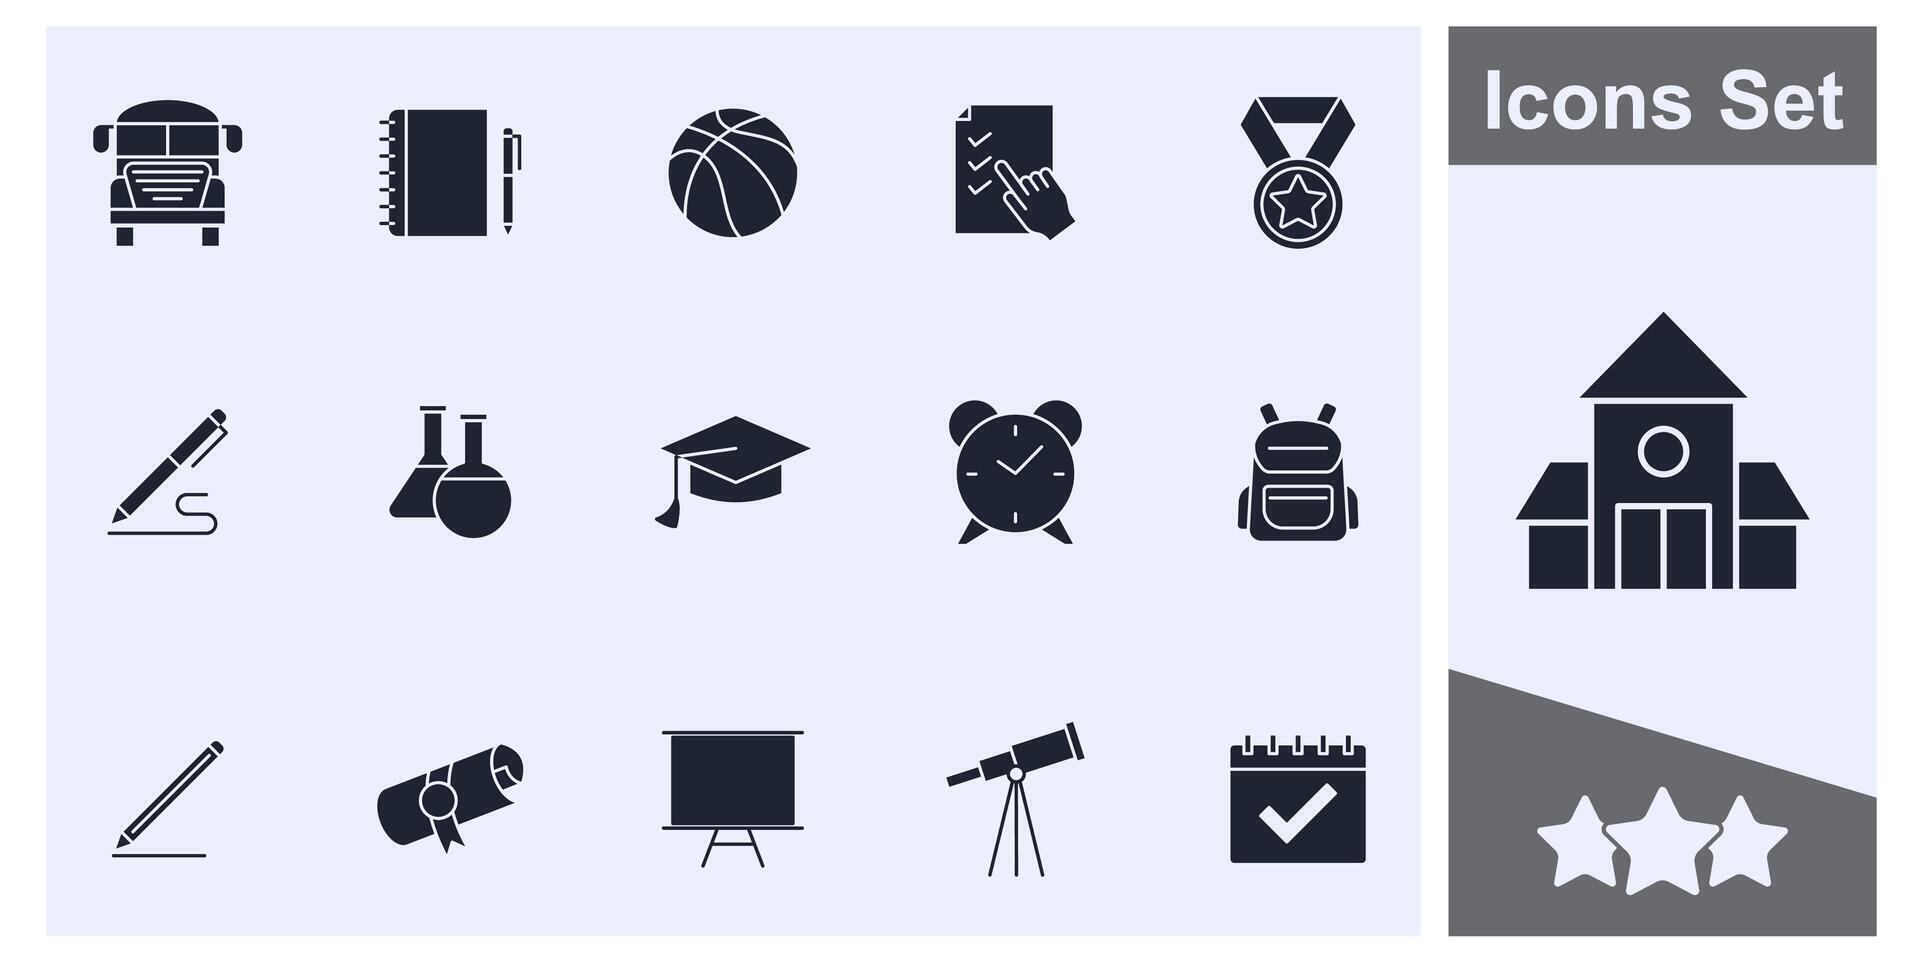 Education and back to school icon set symbol collection, logo isolated illustration vector